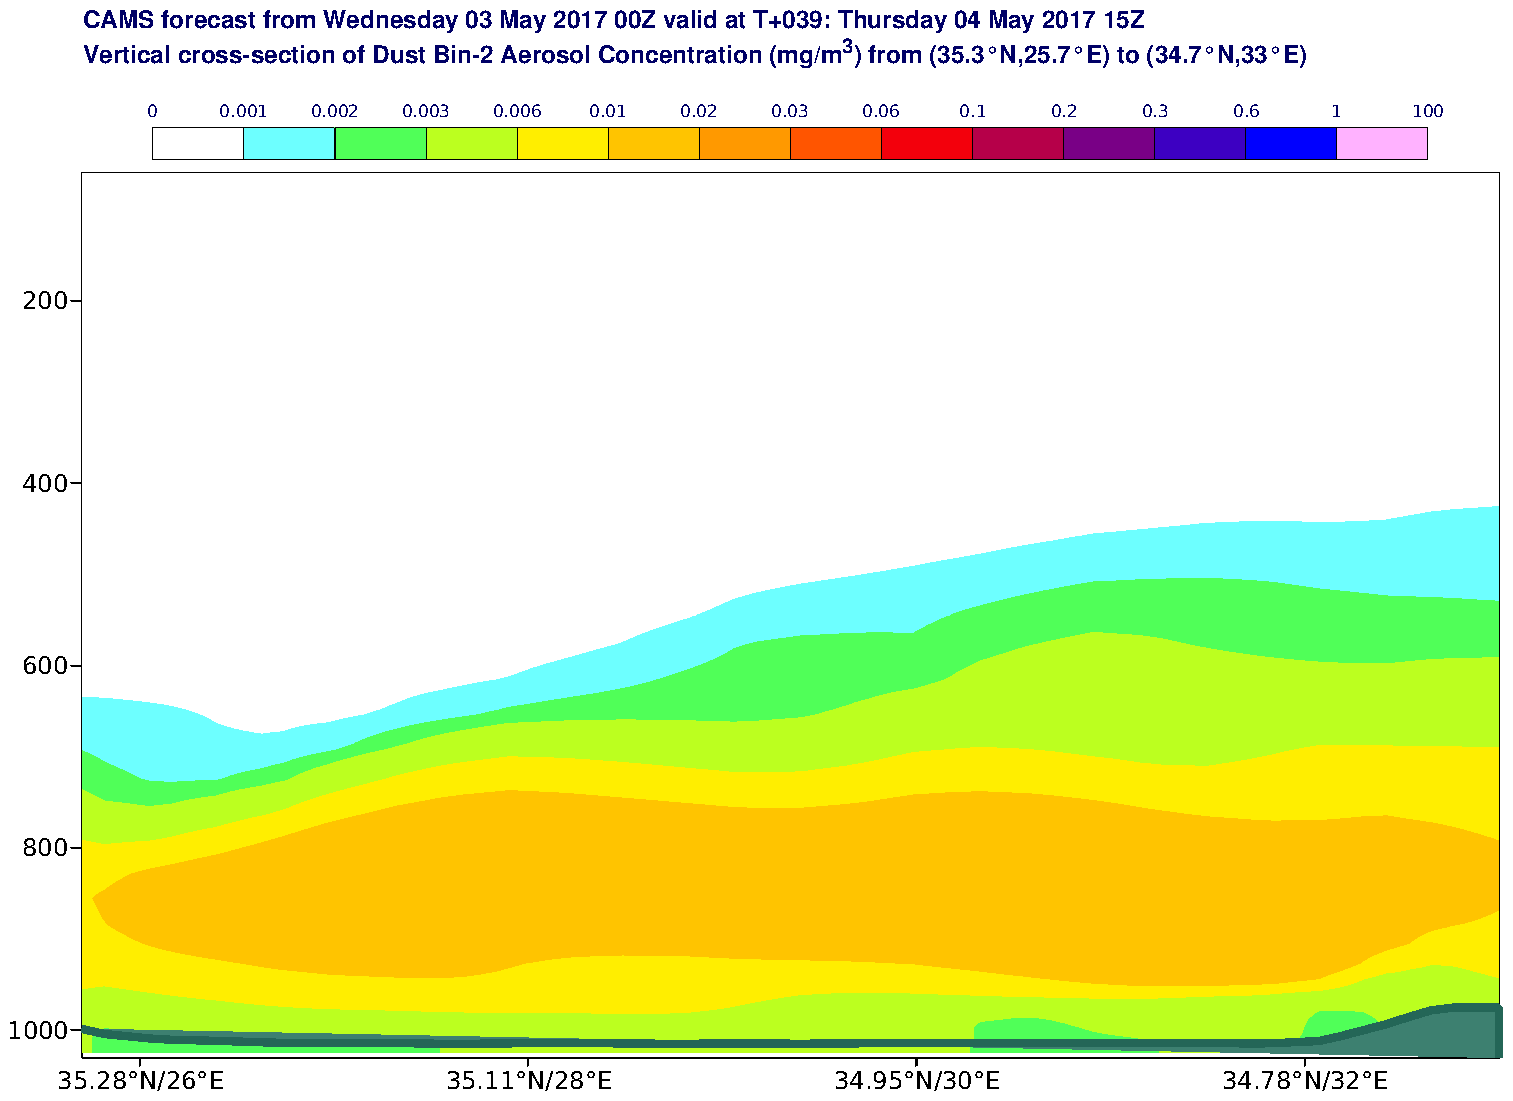 Vertical cross-section of Dust Bin-2 Aerosol Concentration (mg/m3) valid at T39 - 2017-05-04 15:00